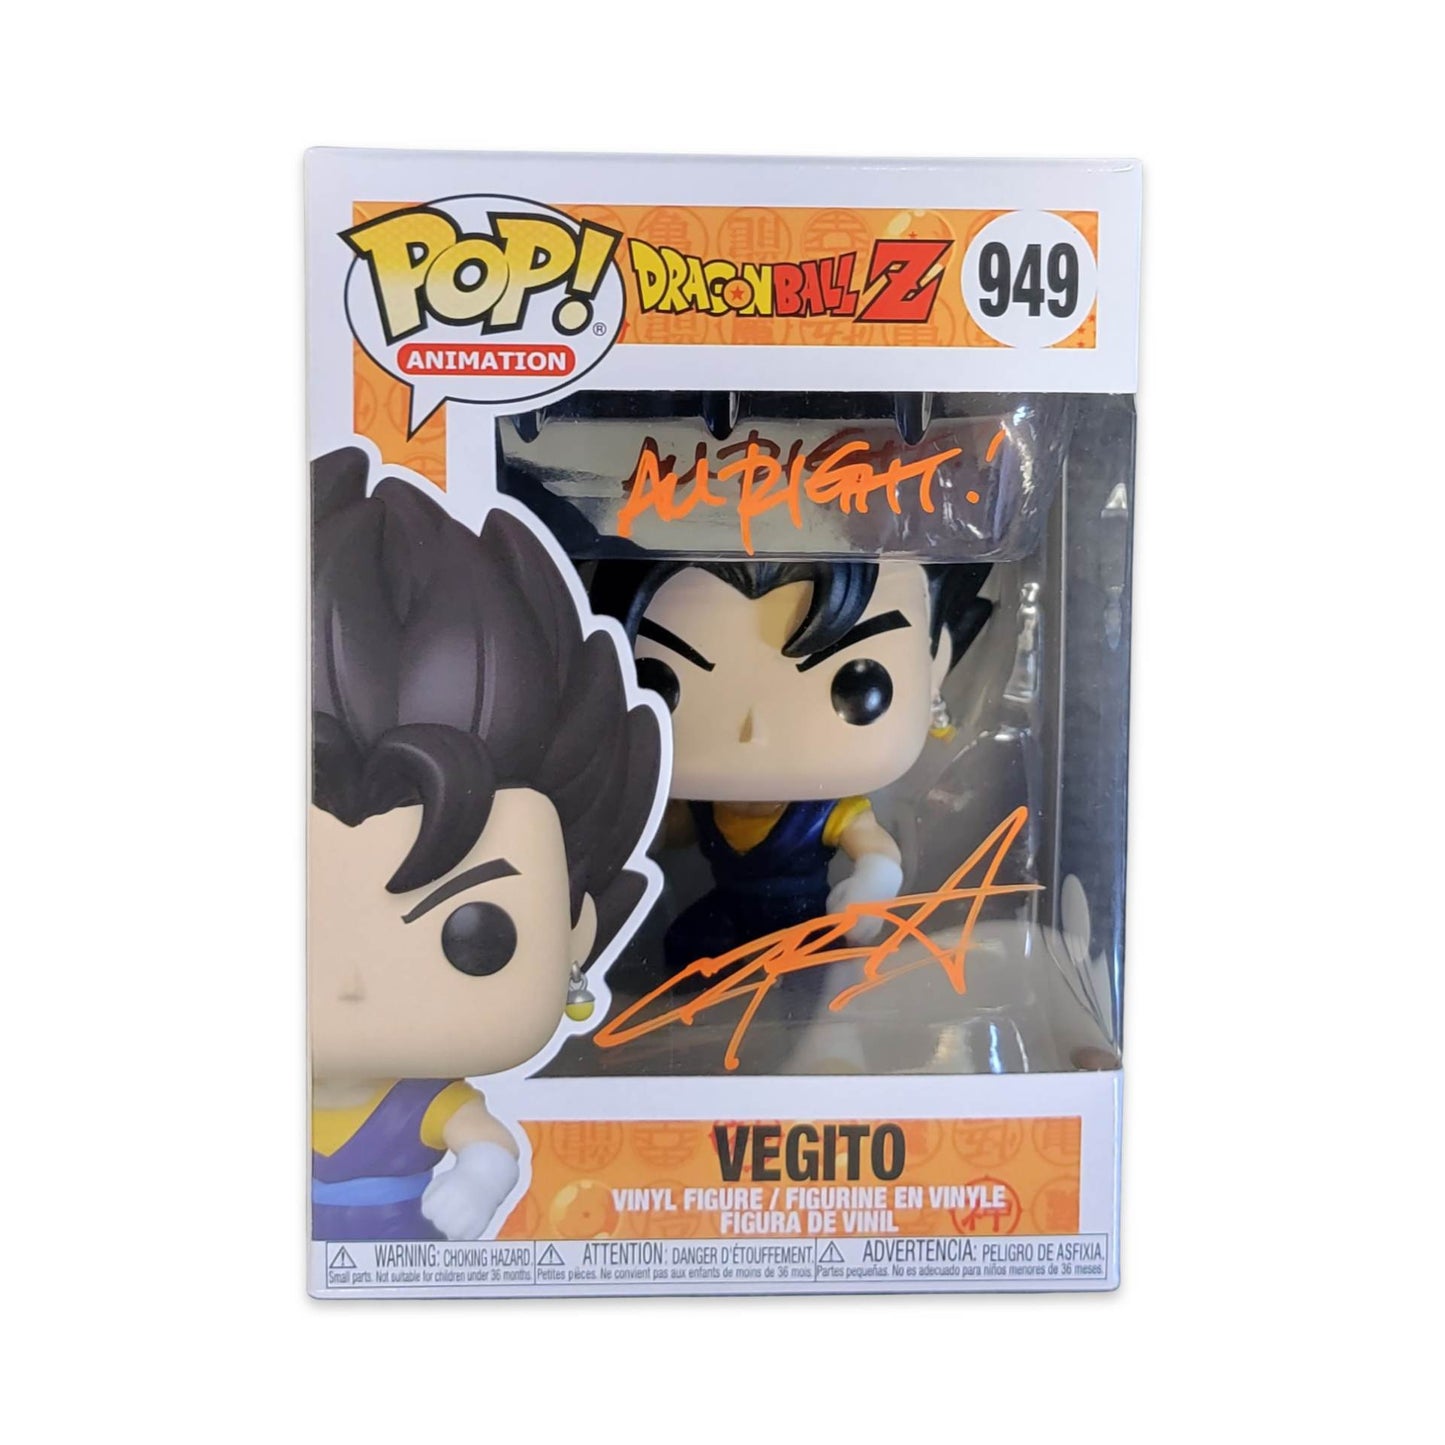 CHRISTOPHER SABAT SIGNED VEGITO DRAGONBALL Z FUNKO POP! AUTOGRAPH IS JSA AUTHENTICATED IN STOCK